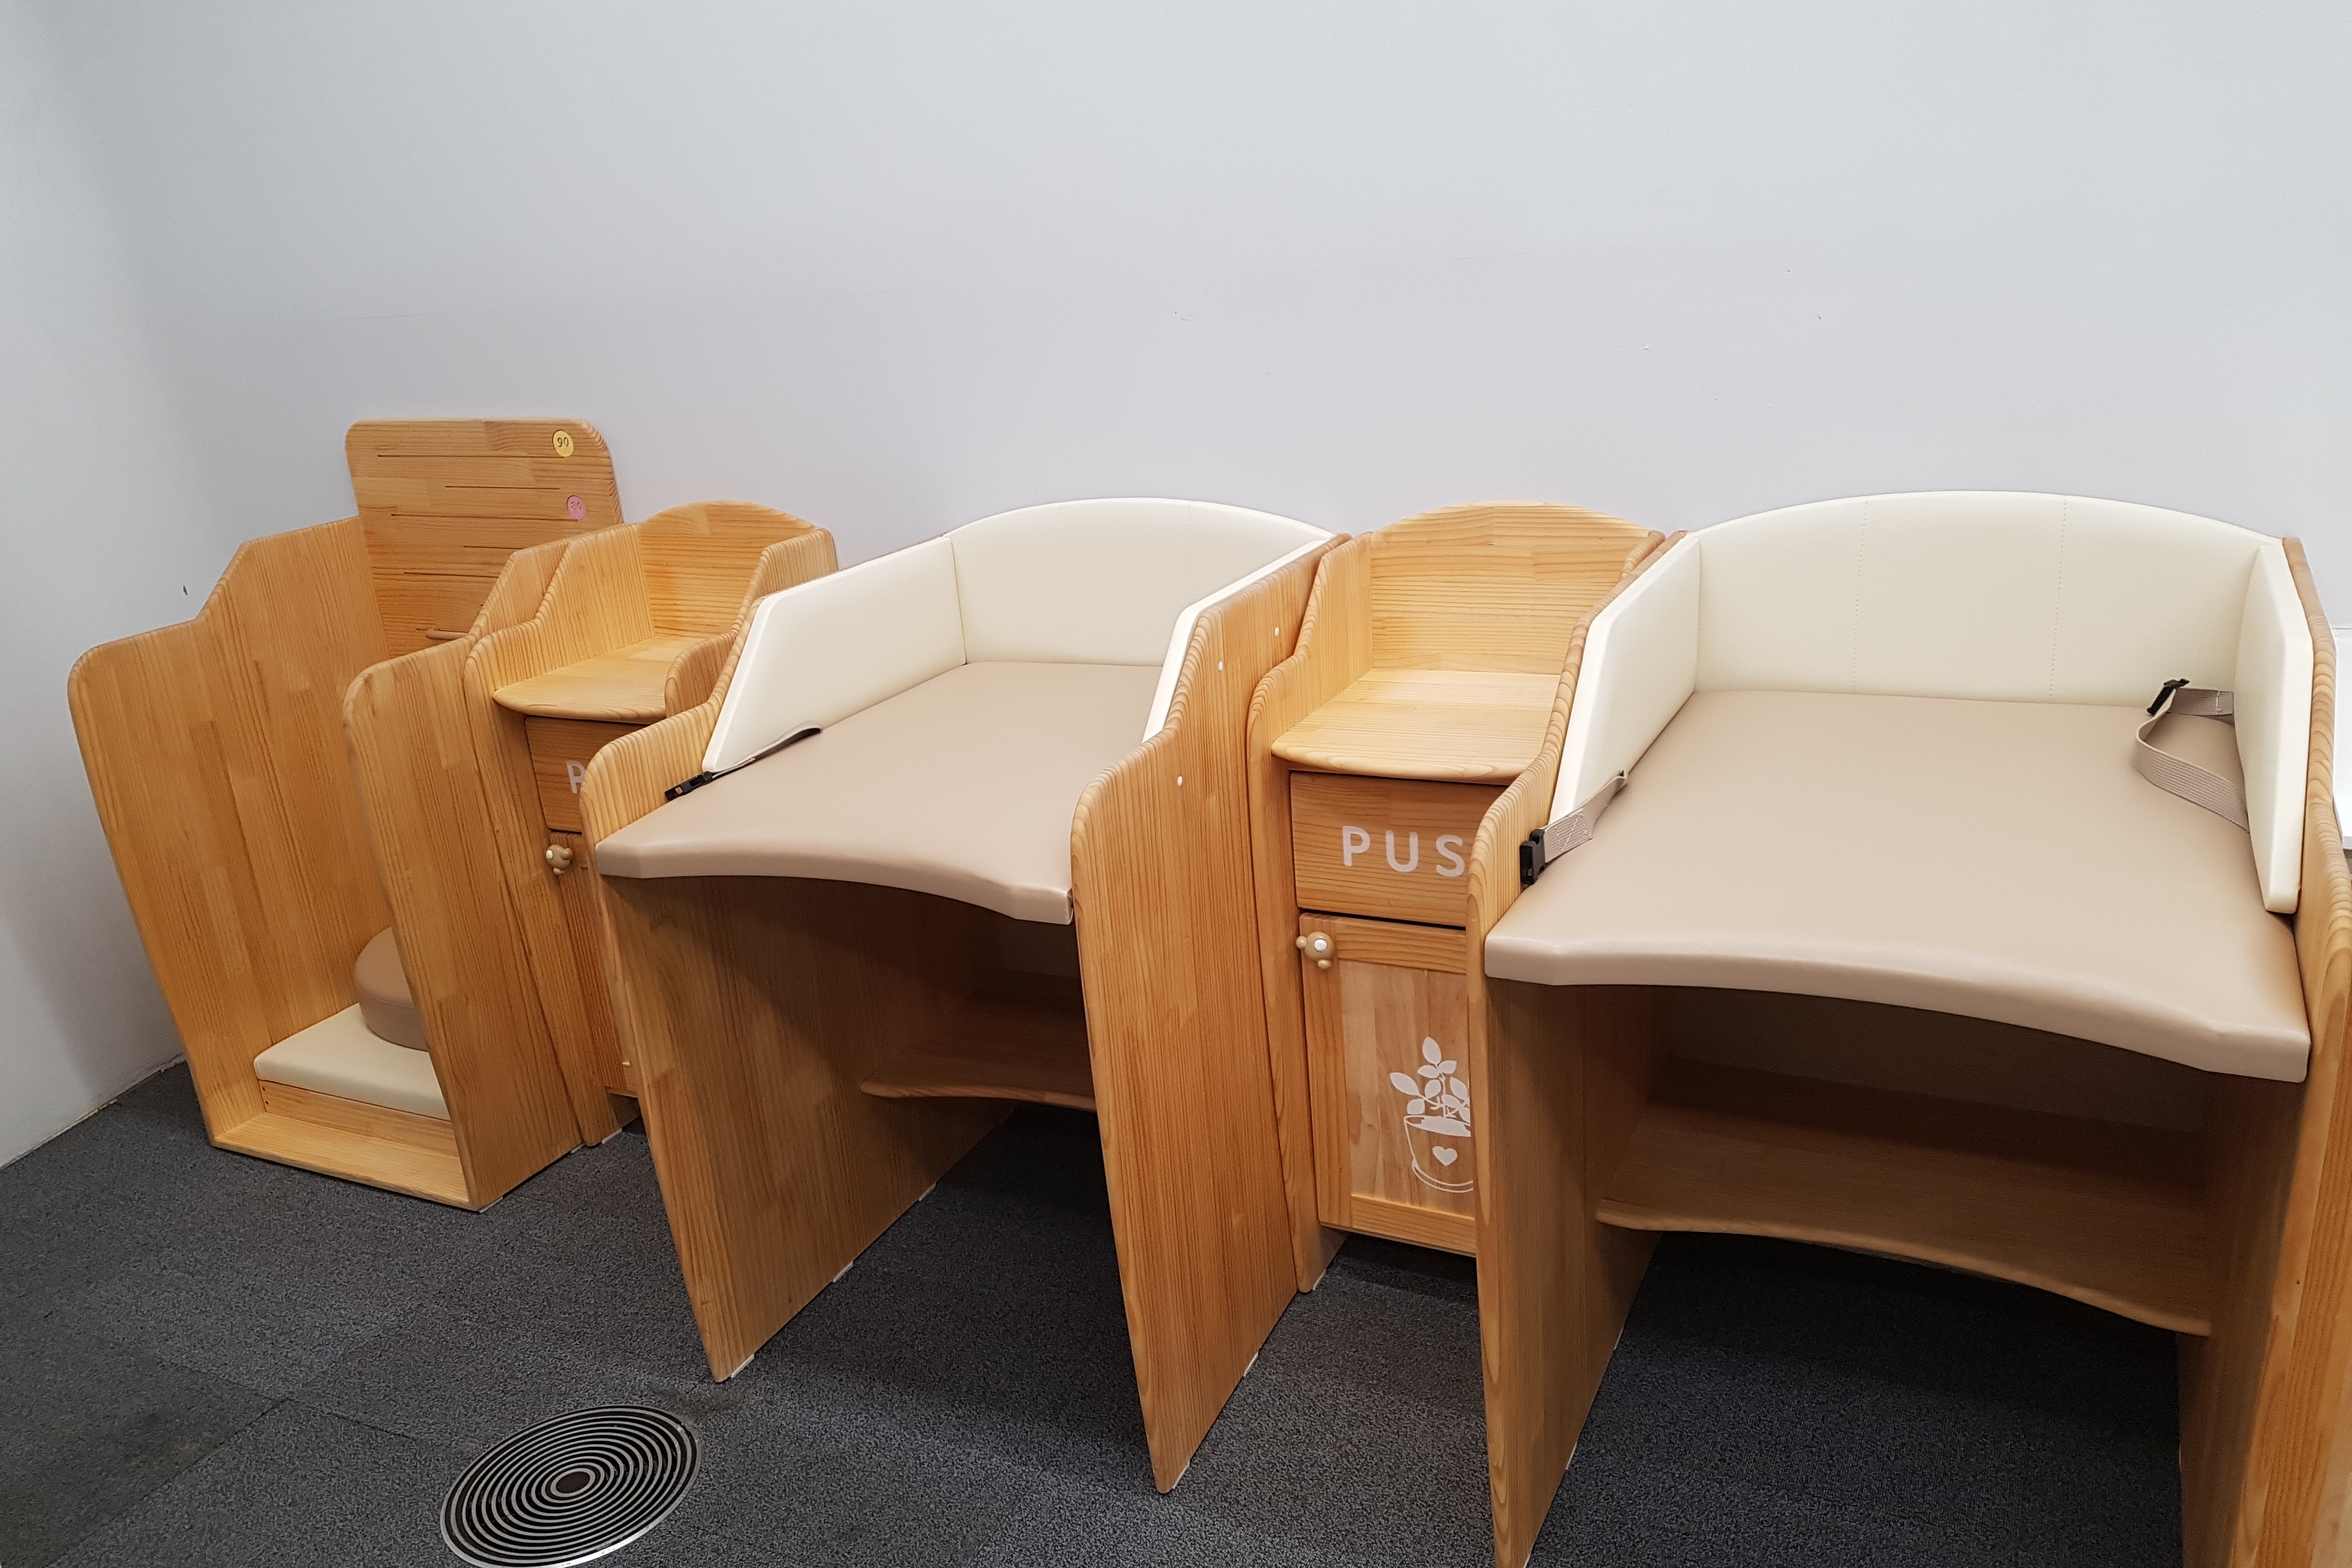 Lounge for families with babies 0 : Diaper changing station in Dongdaemun Design Plaza's nursing room
